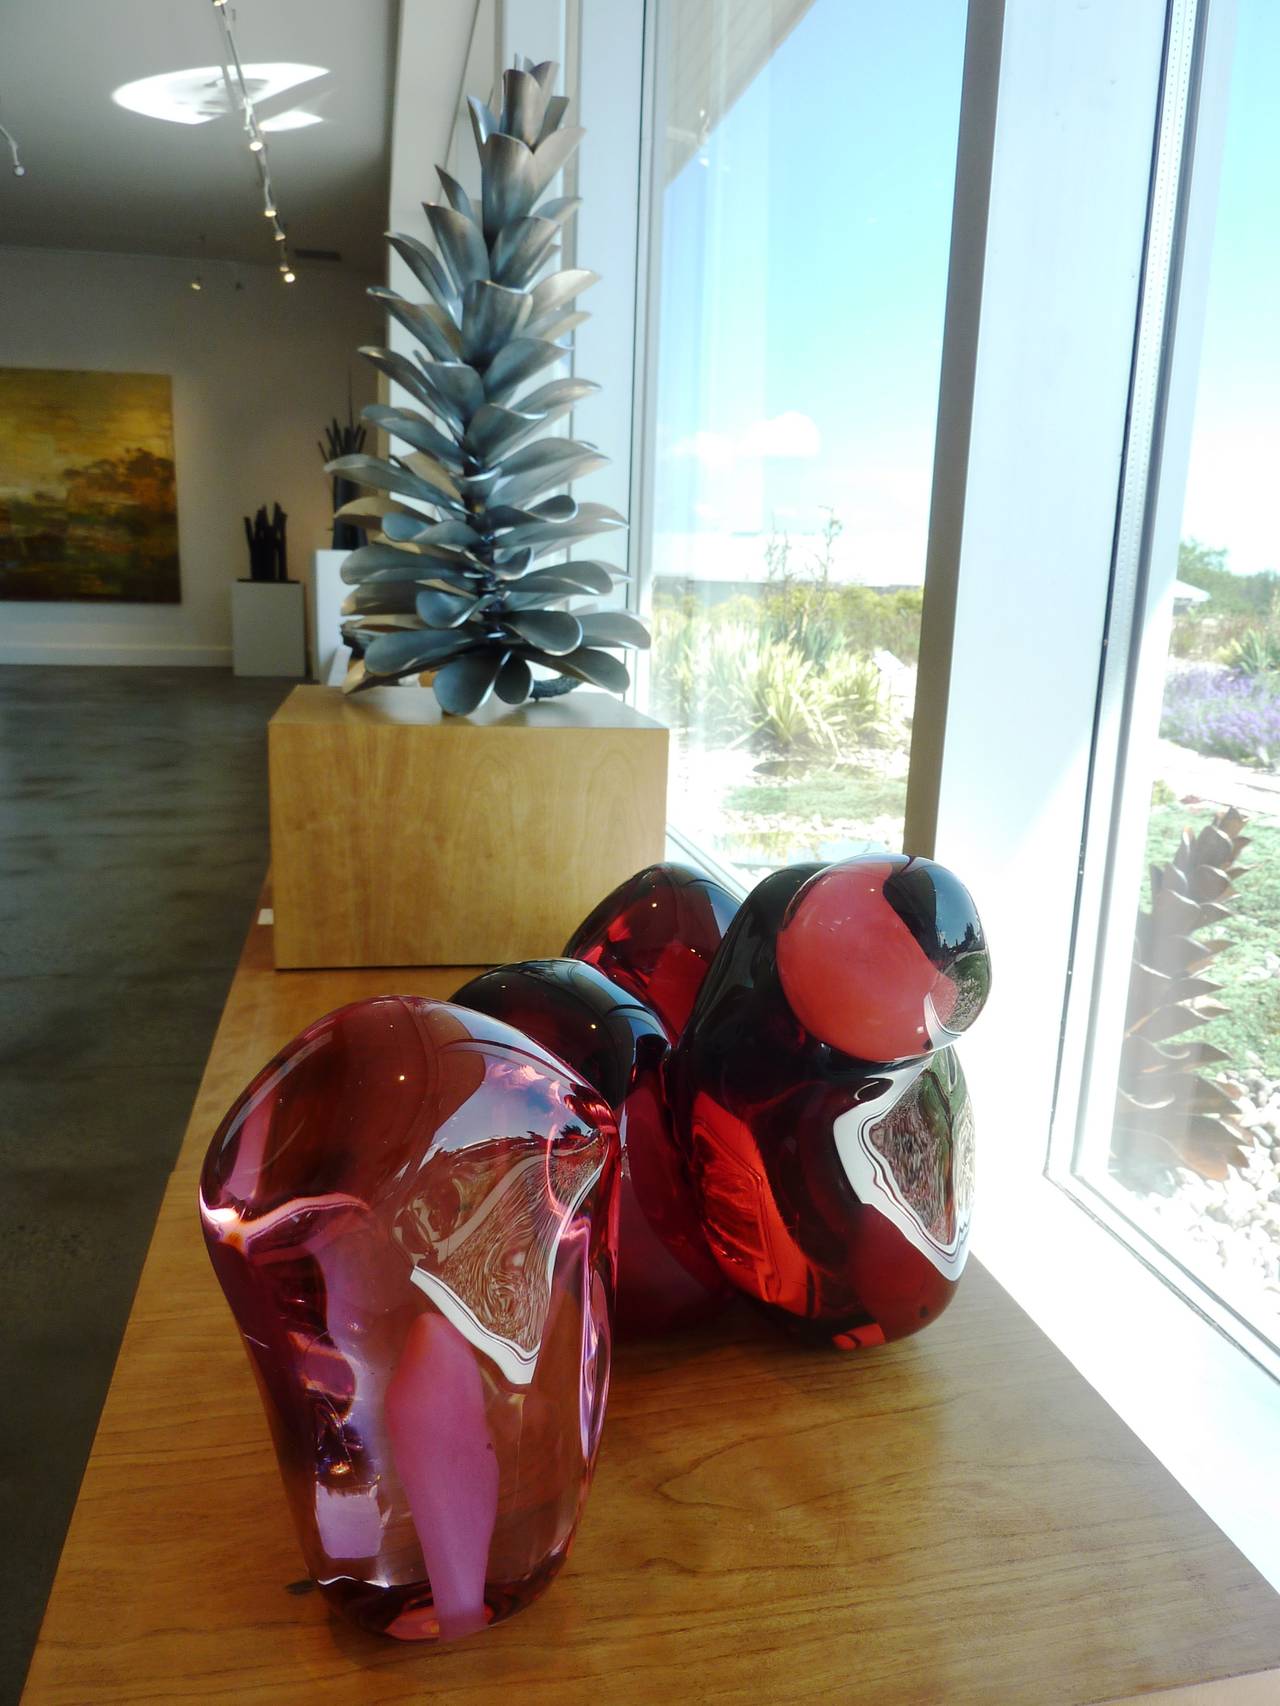 Luscious red glass sculpture, clear glass on the outer layer, opaque in the interior. Part of the artists famous pomegranate series, which has been exhibited in major international invitational exhibitions.

Vamvakas Lay holds a degree in Fine